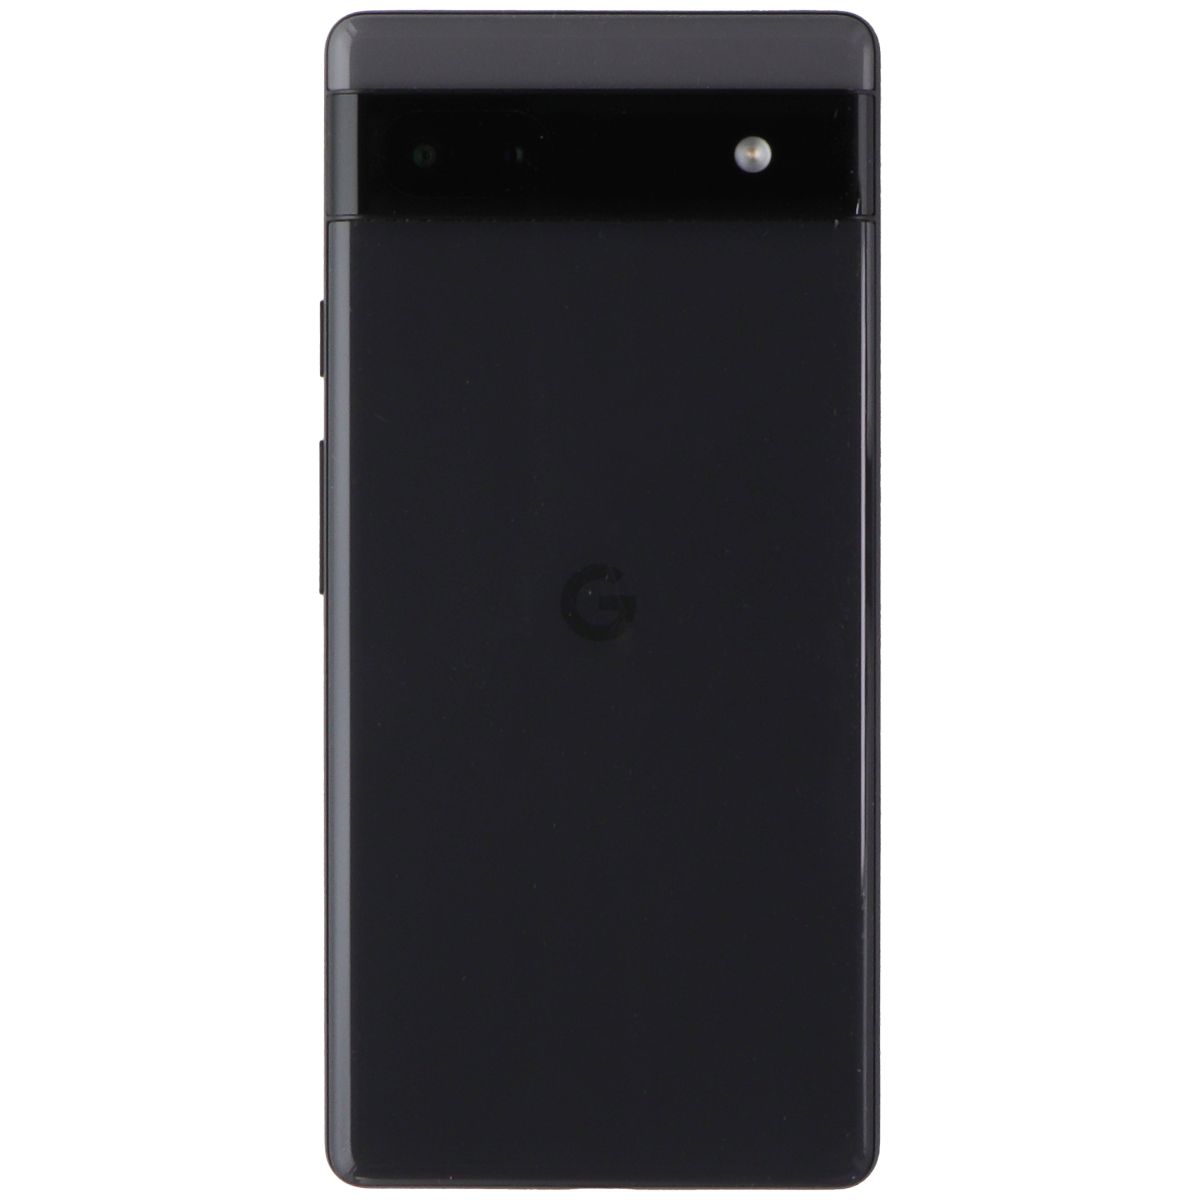 Google Pixel 6a (6.1-in) Smartphone (GX7AS) Unlocked 128GB/Charcoal Bad Sensors Cell Phones & Smartphones Google    - Simple Cell Bulk Wholesale Pricing - USA Seller